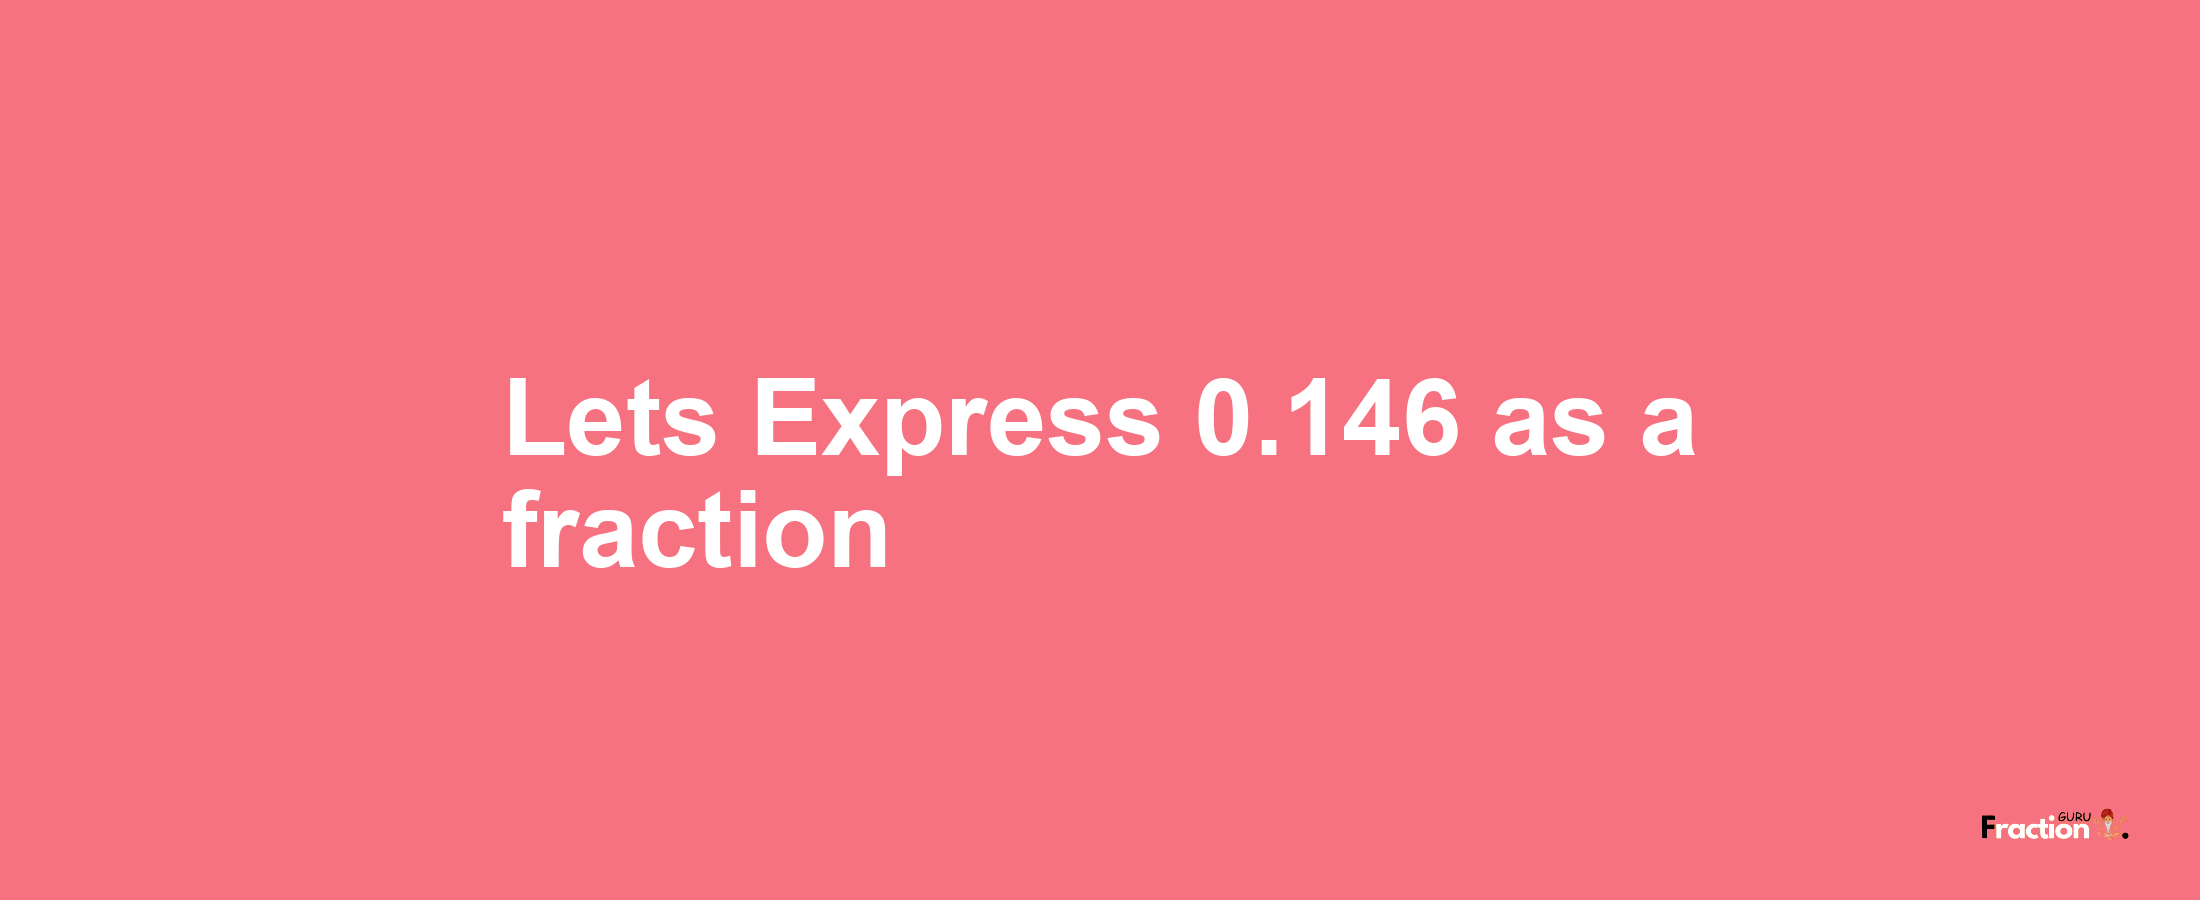 Lets Express 0.146 as afraction